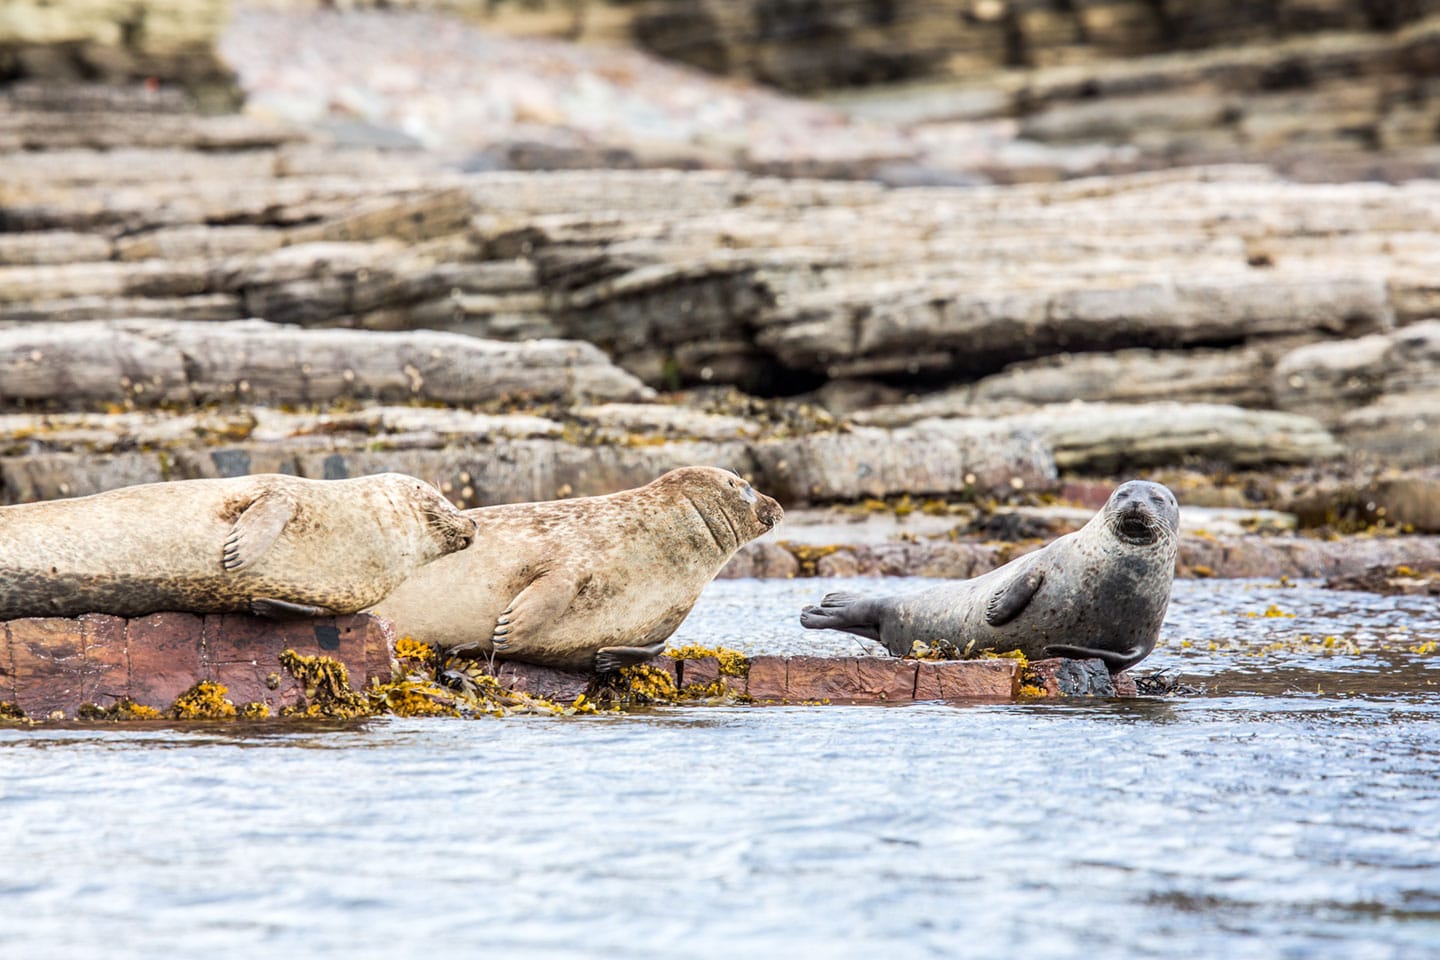 Seals in Scotland during a travel photography trip in the summer